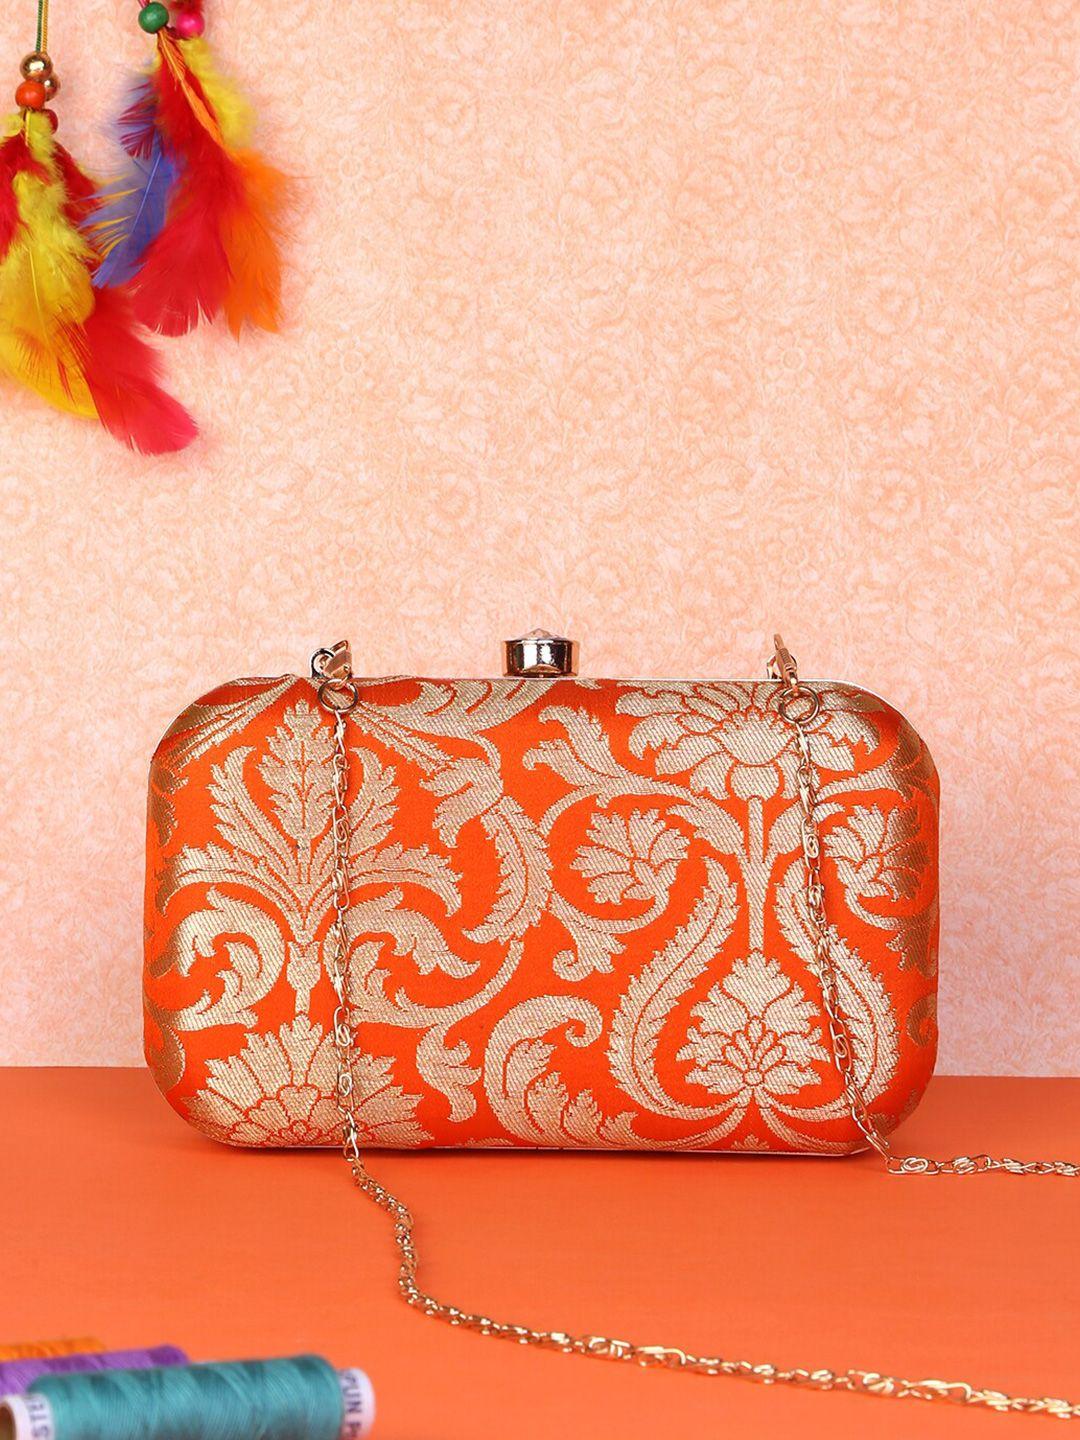 trink printed box clutch with chain strap